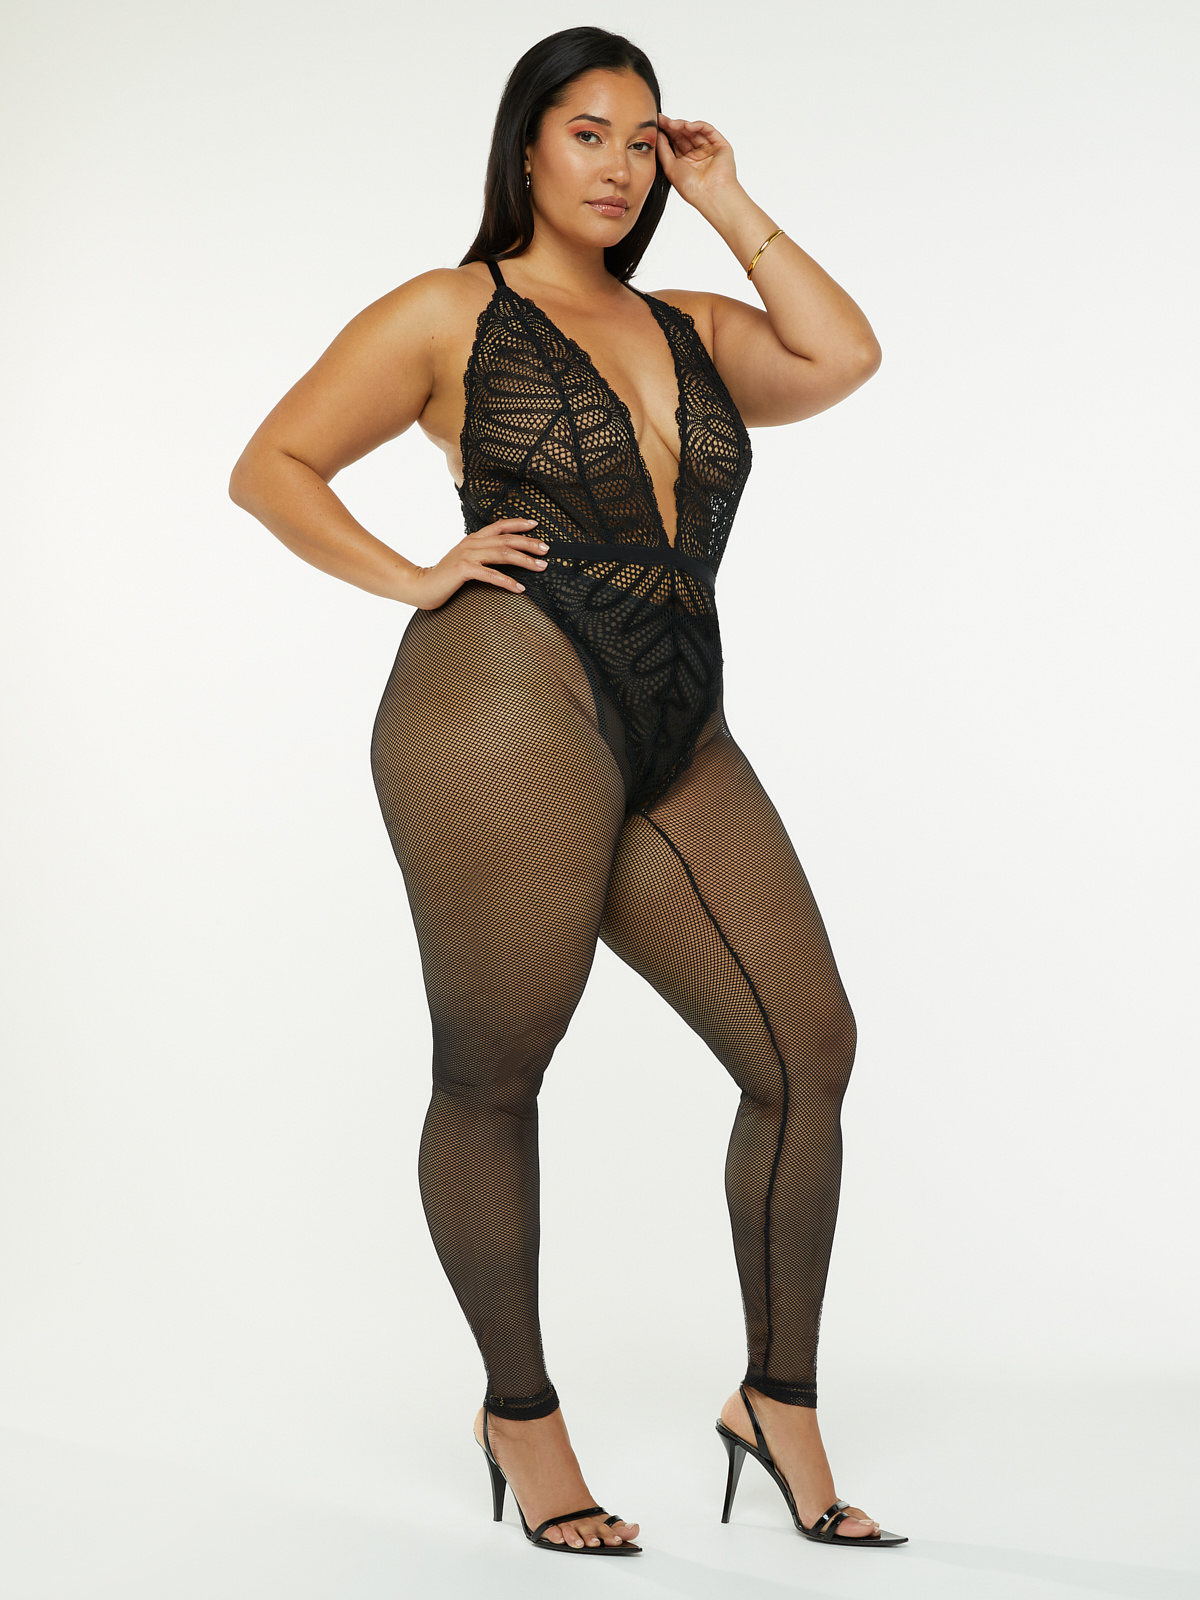 Stranded In Lace Crochet Catsuit